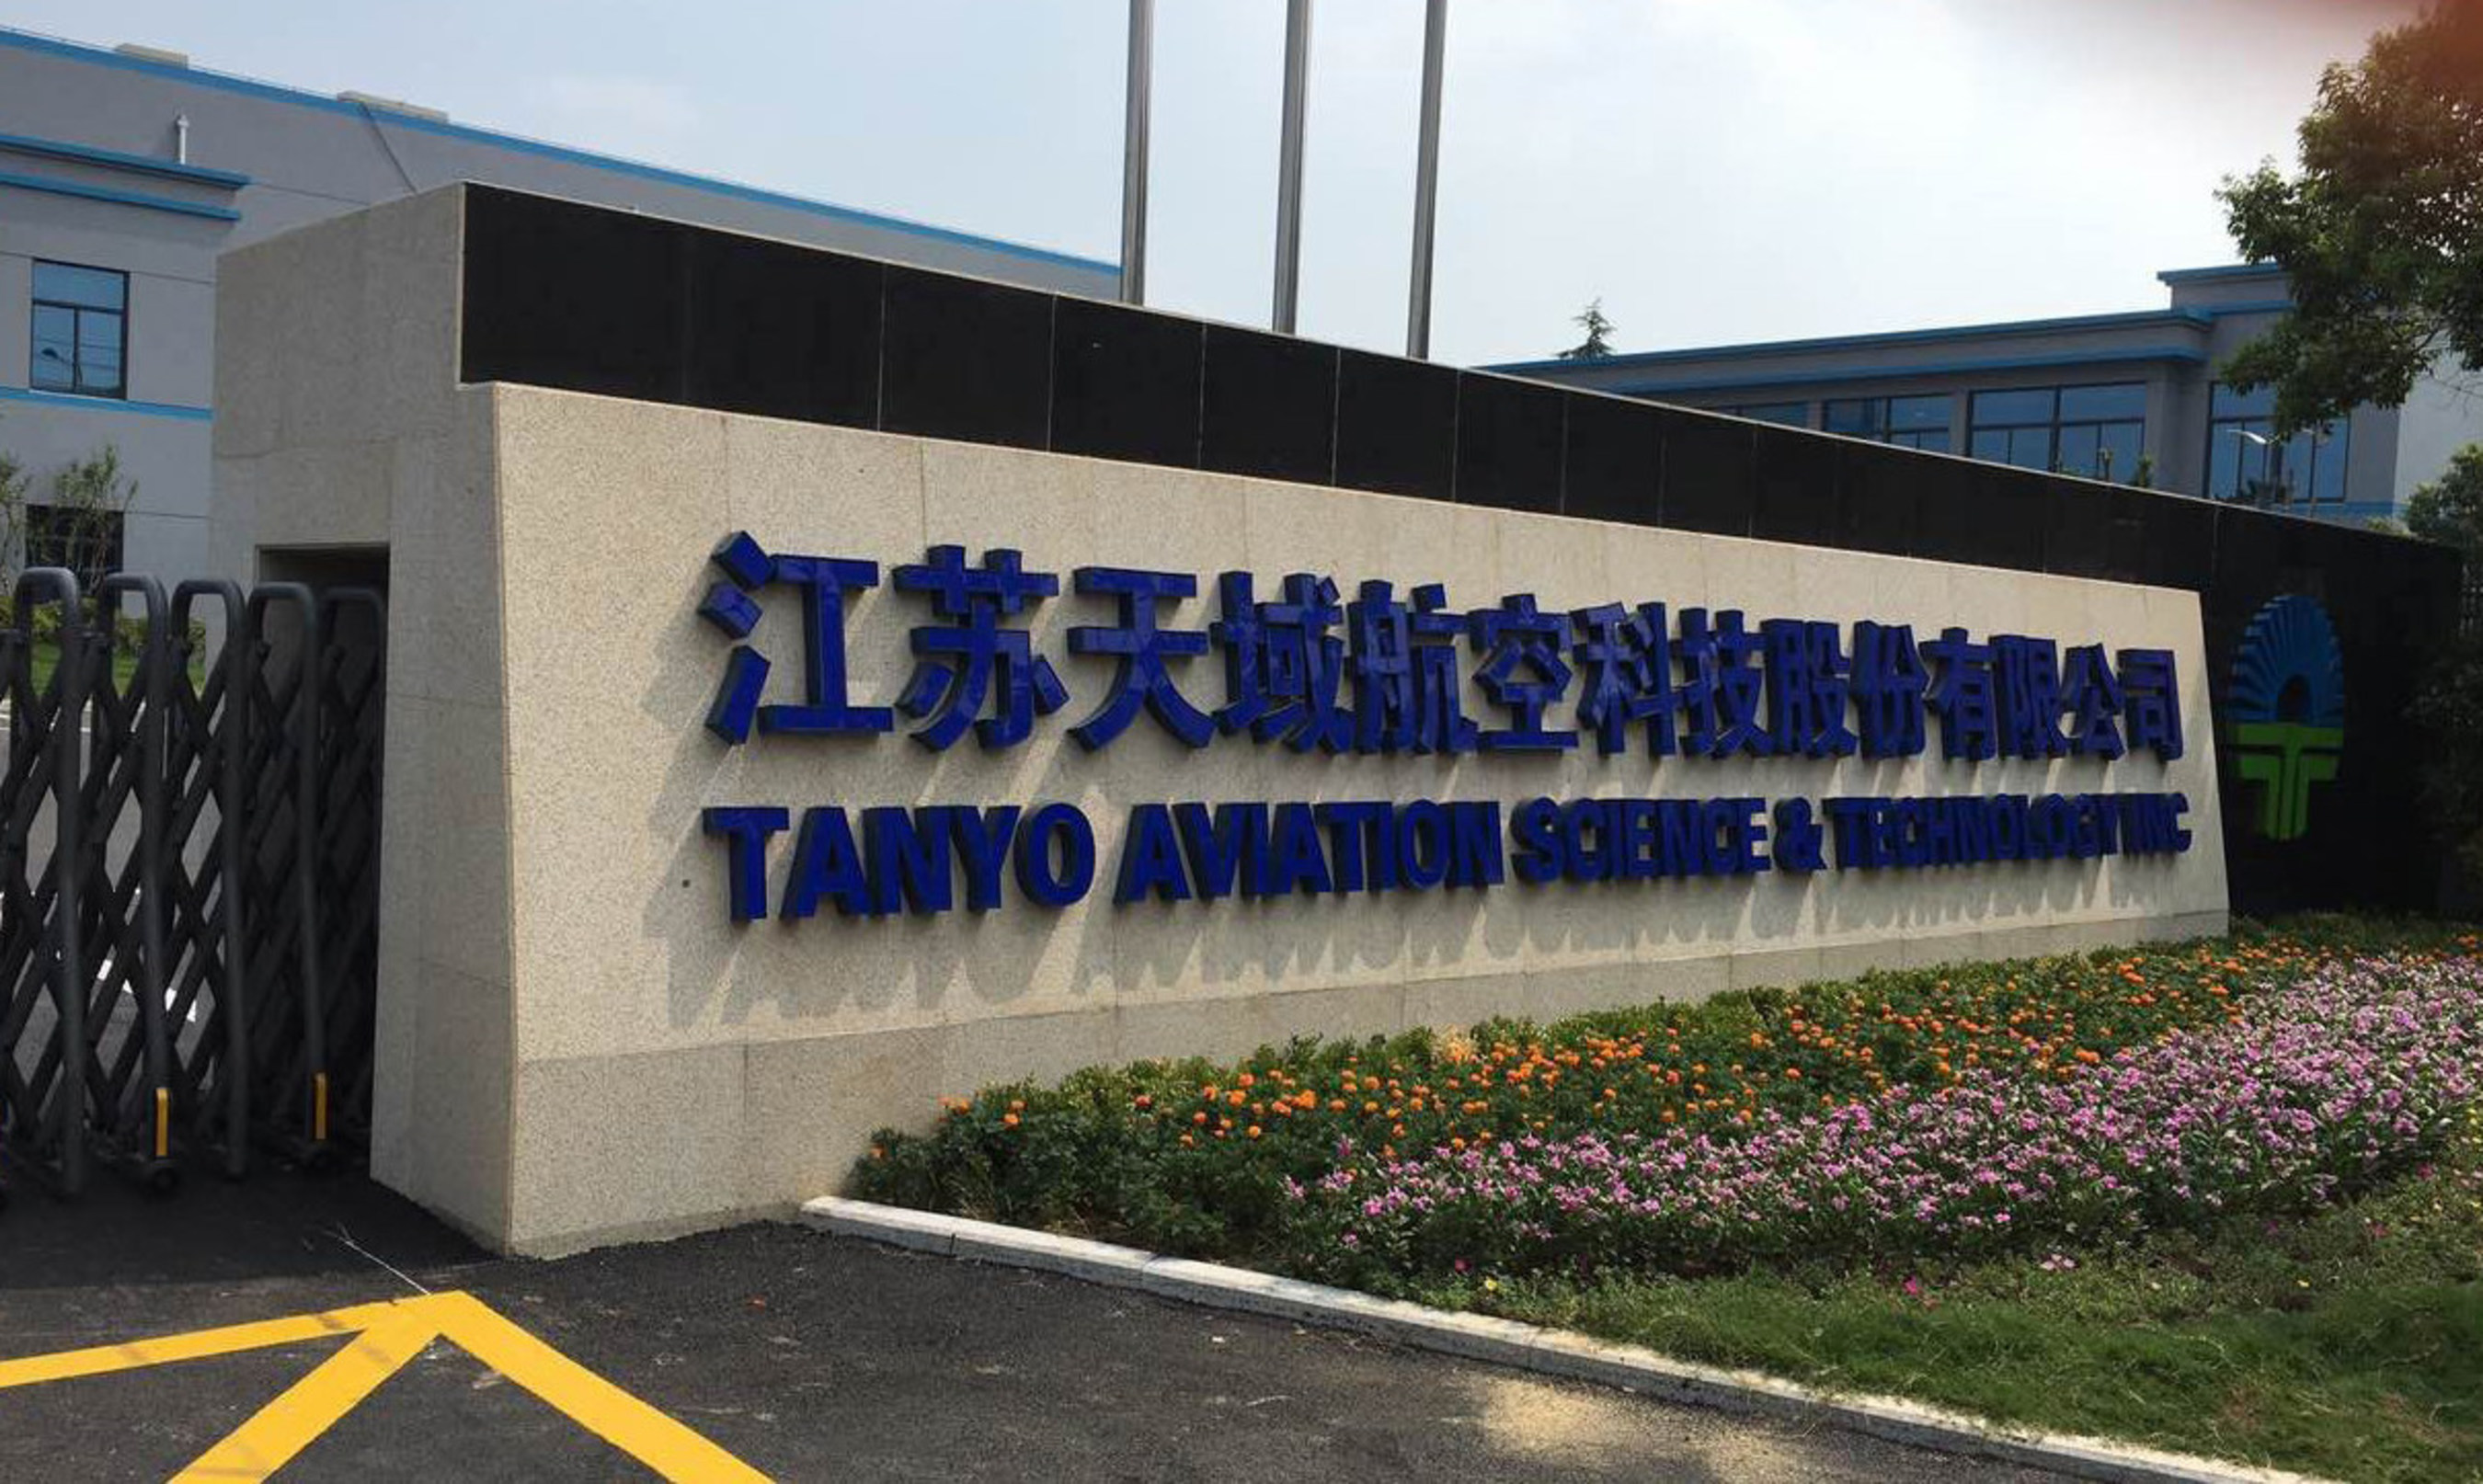 Jiangsu Tianyu Aviation Technology Co., Ltd. registered on March 18th of this year to set up a manufacturing and operations facility in Changzhou National Hi-Tech District.